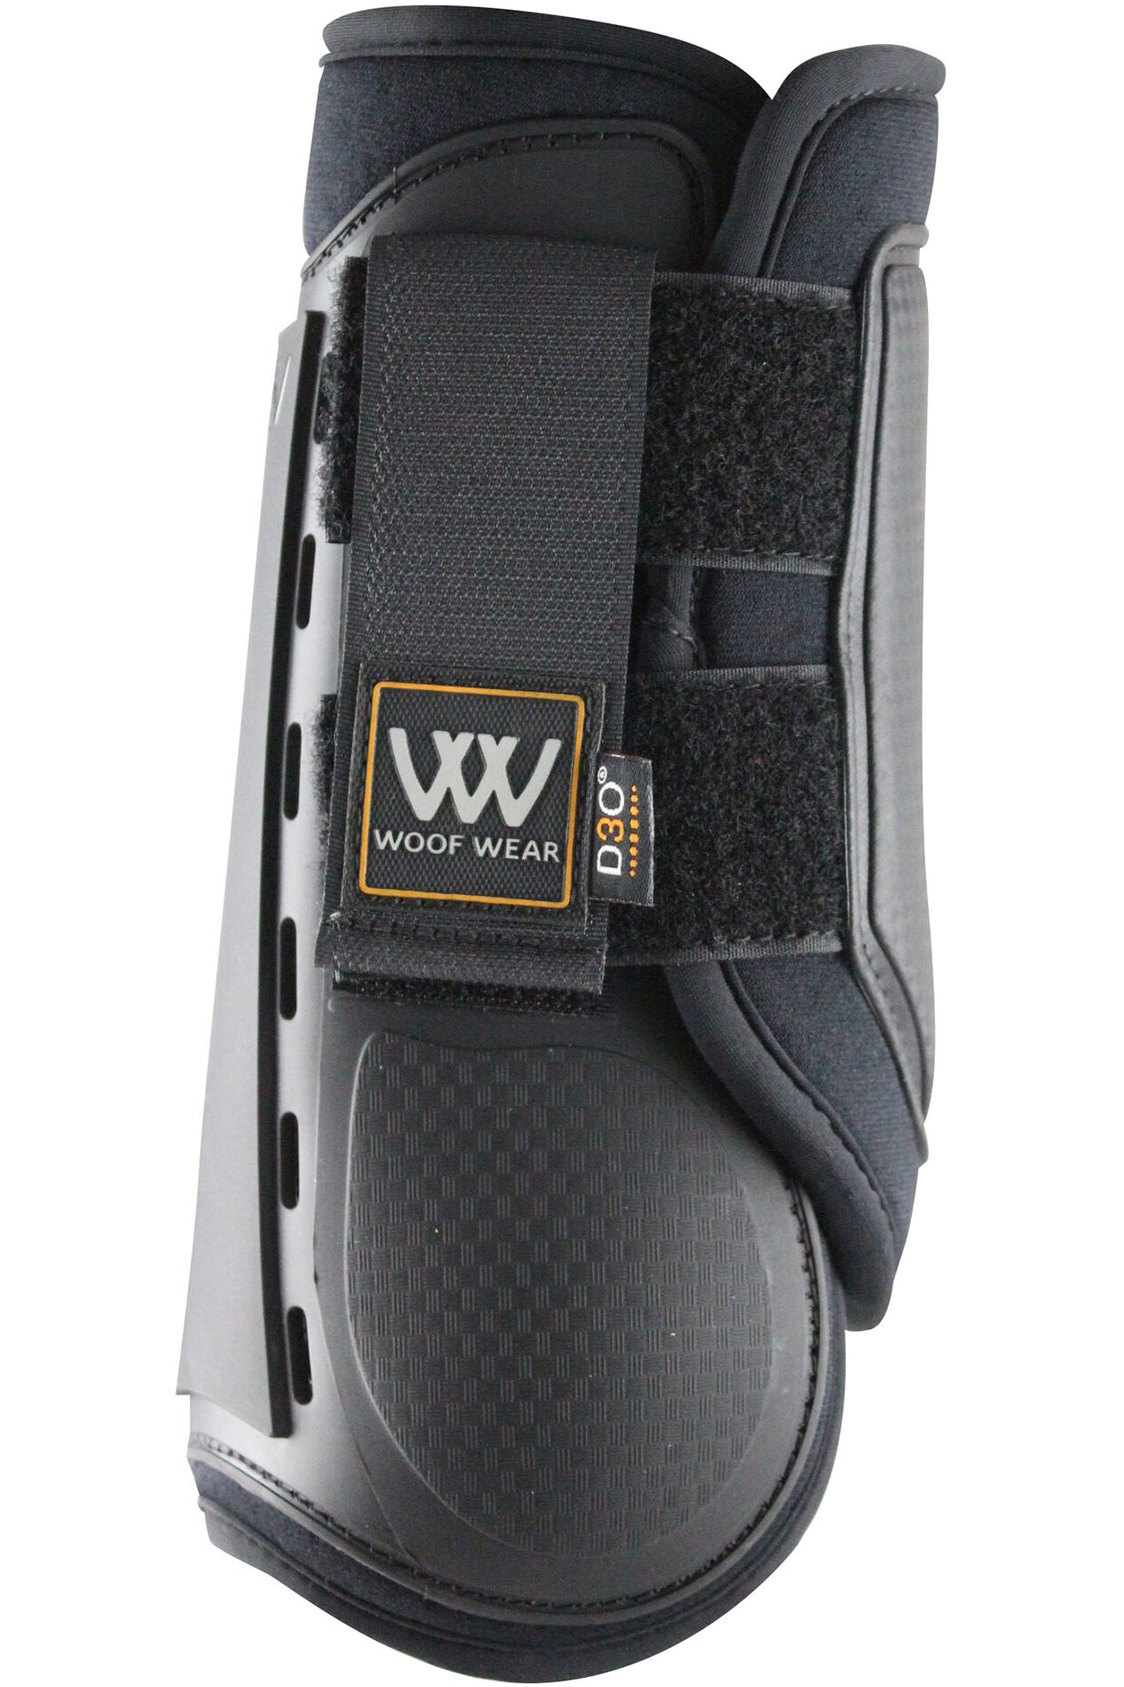 Woof Wear Smart Front Unisex Horse Boot Event Boots Black All Sizes 